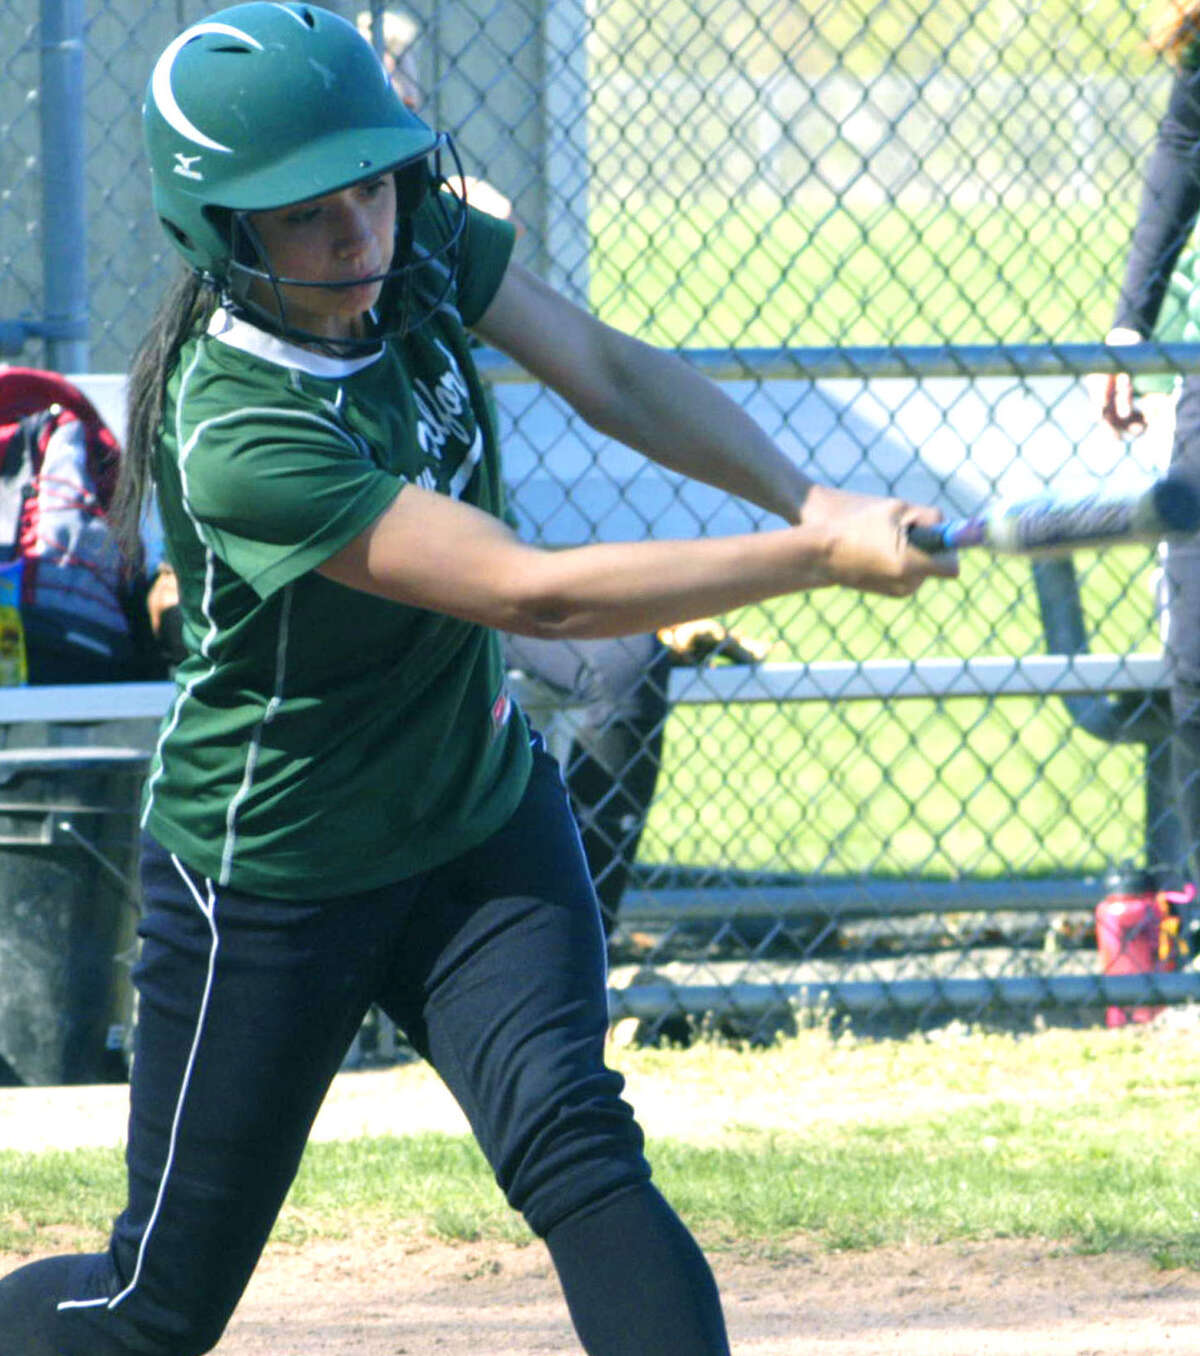 The Green Wave's Vienna Pallisco delivers yet another hit during a 12-1 victory for New Milford High School softball over Pomperaug, May 1, 2013 at NMHS.